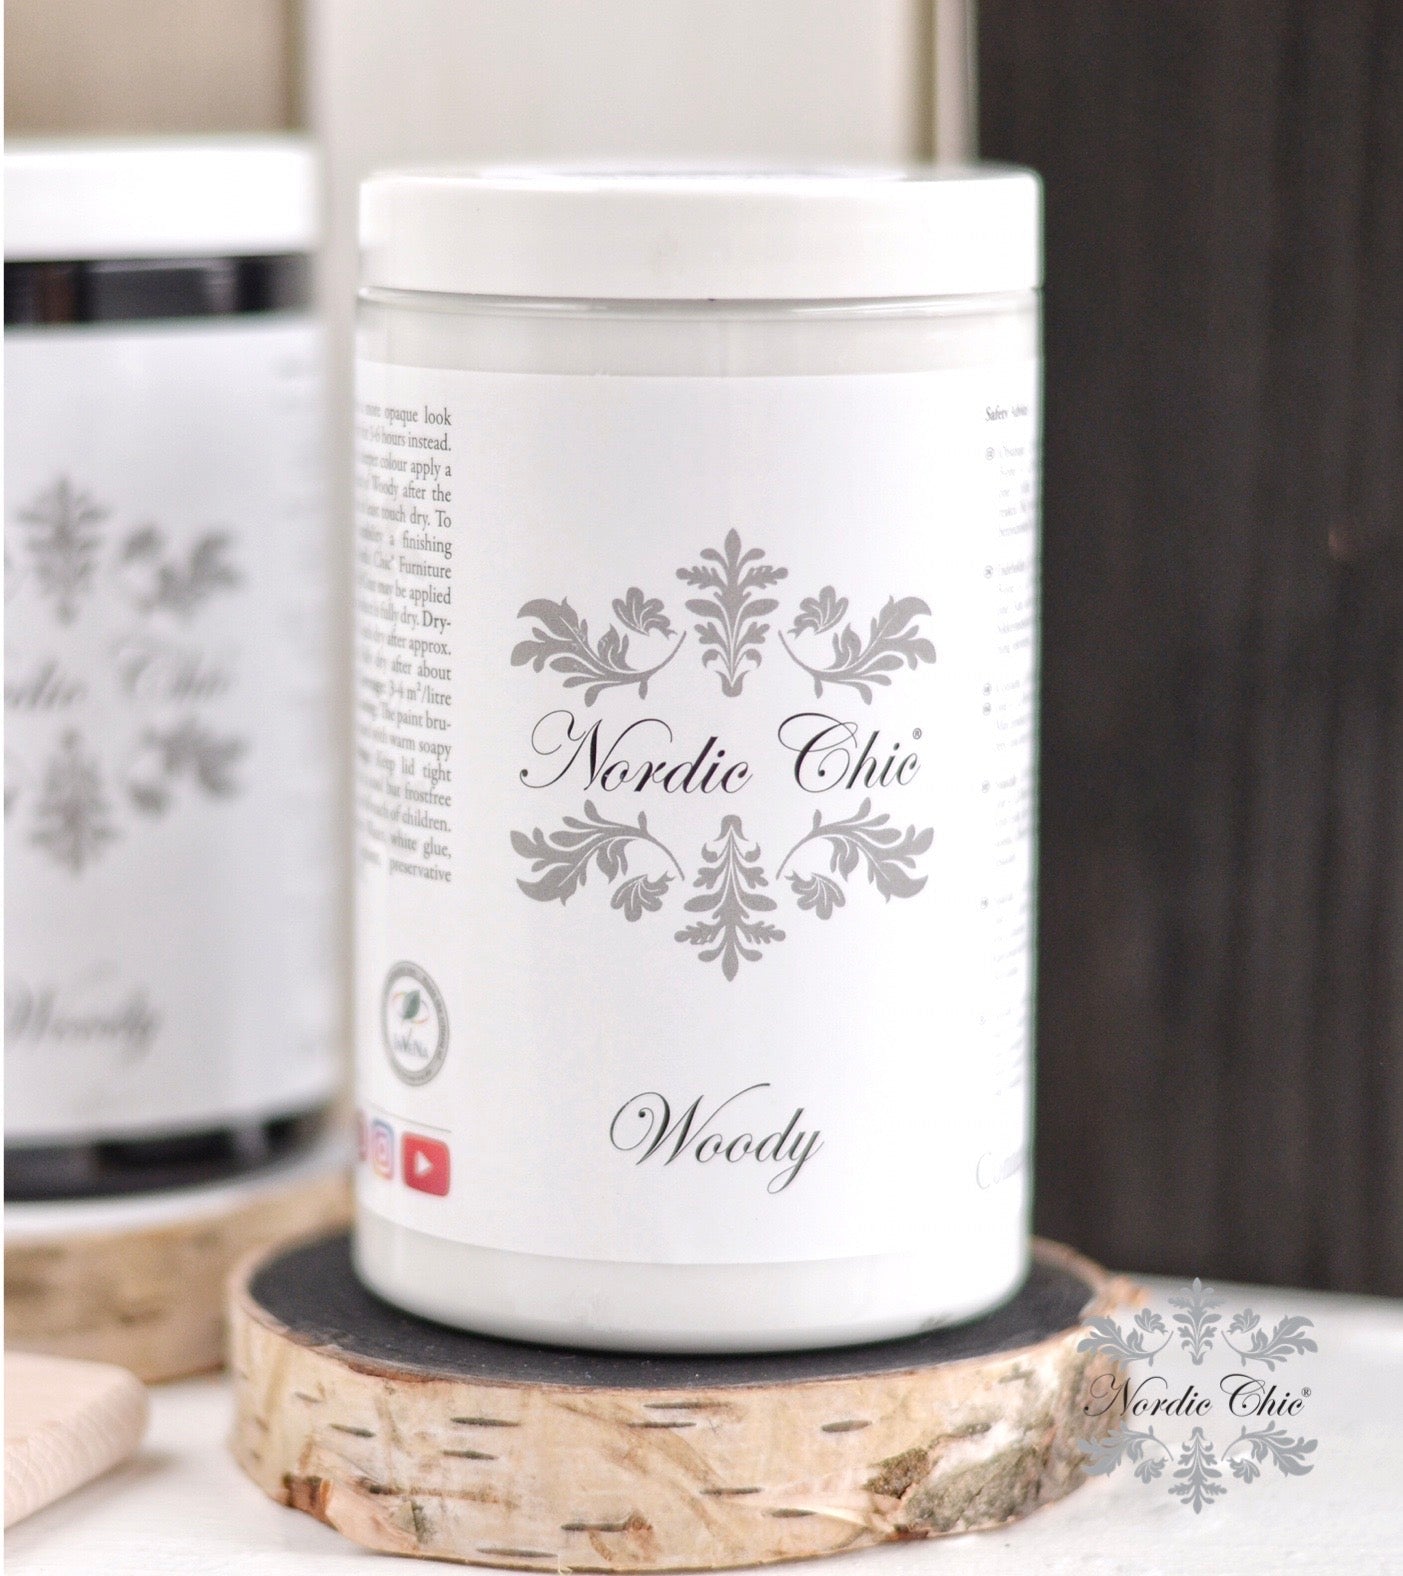 Nordic Chic® Woody stain - Nordic Chic®